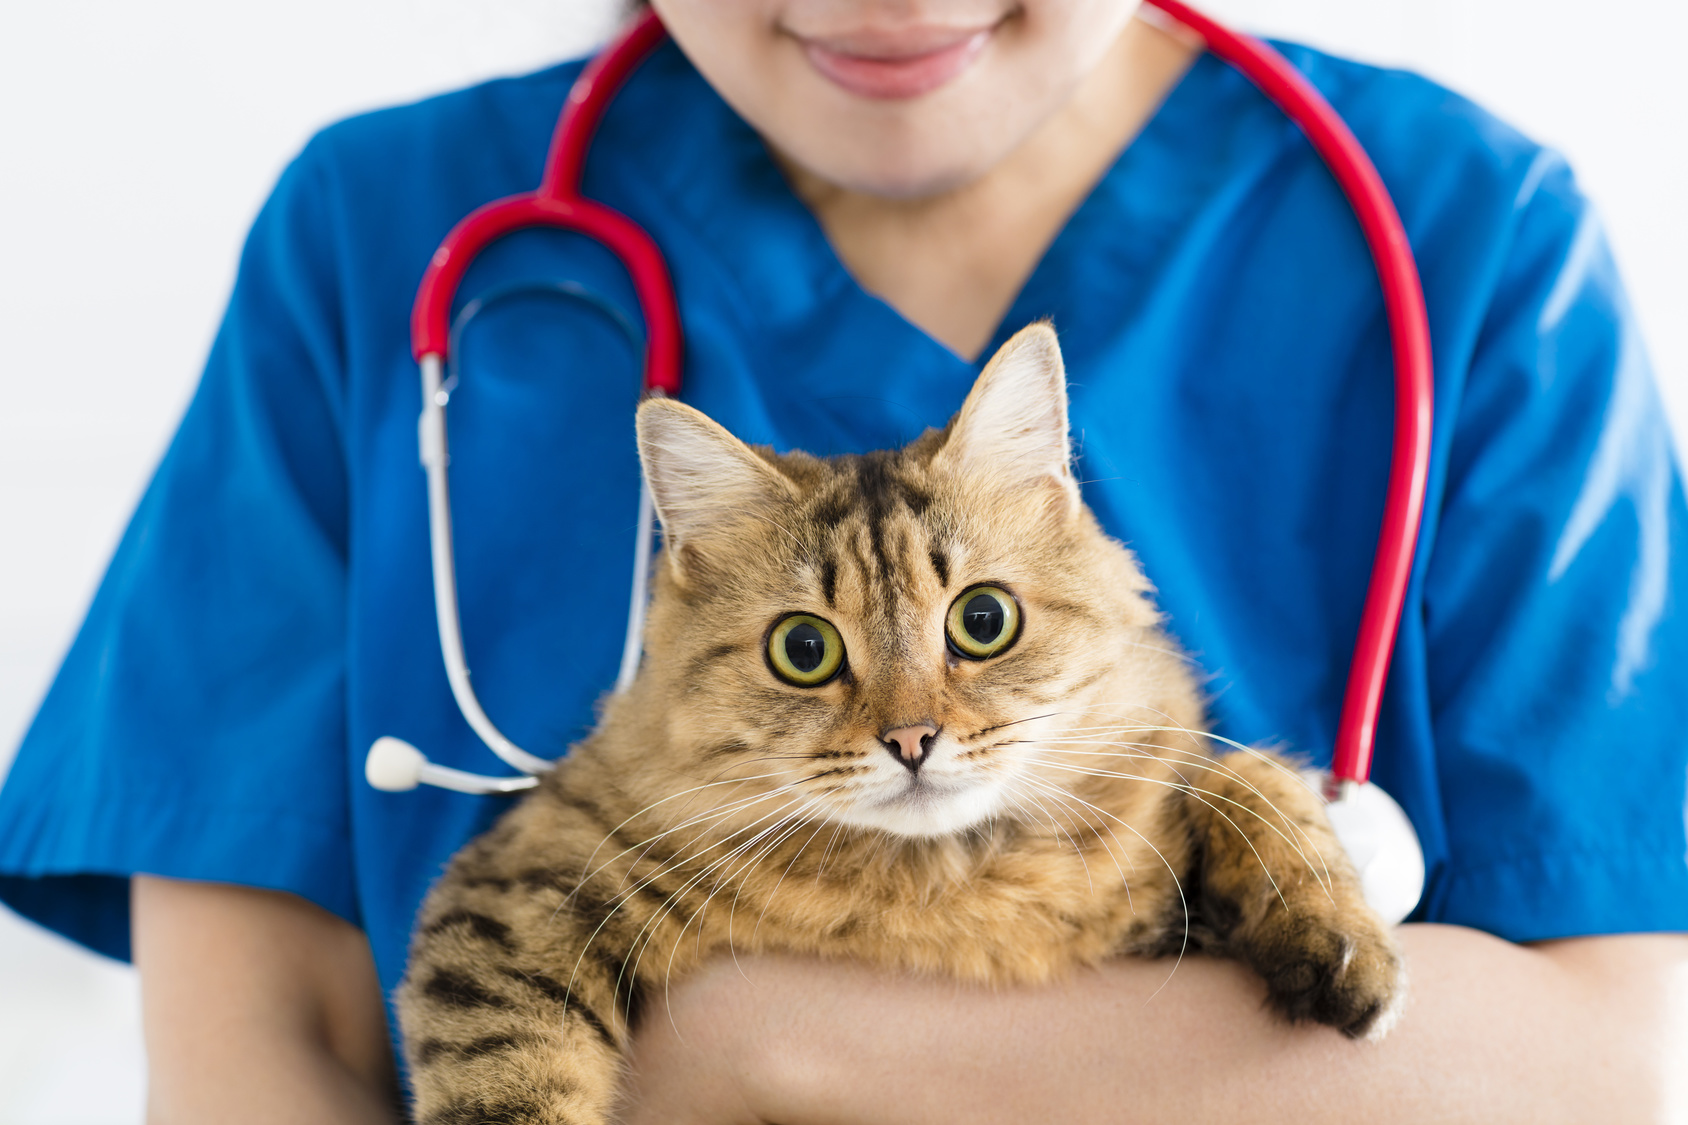 female doctor veterinarian holding cute cat on hands